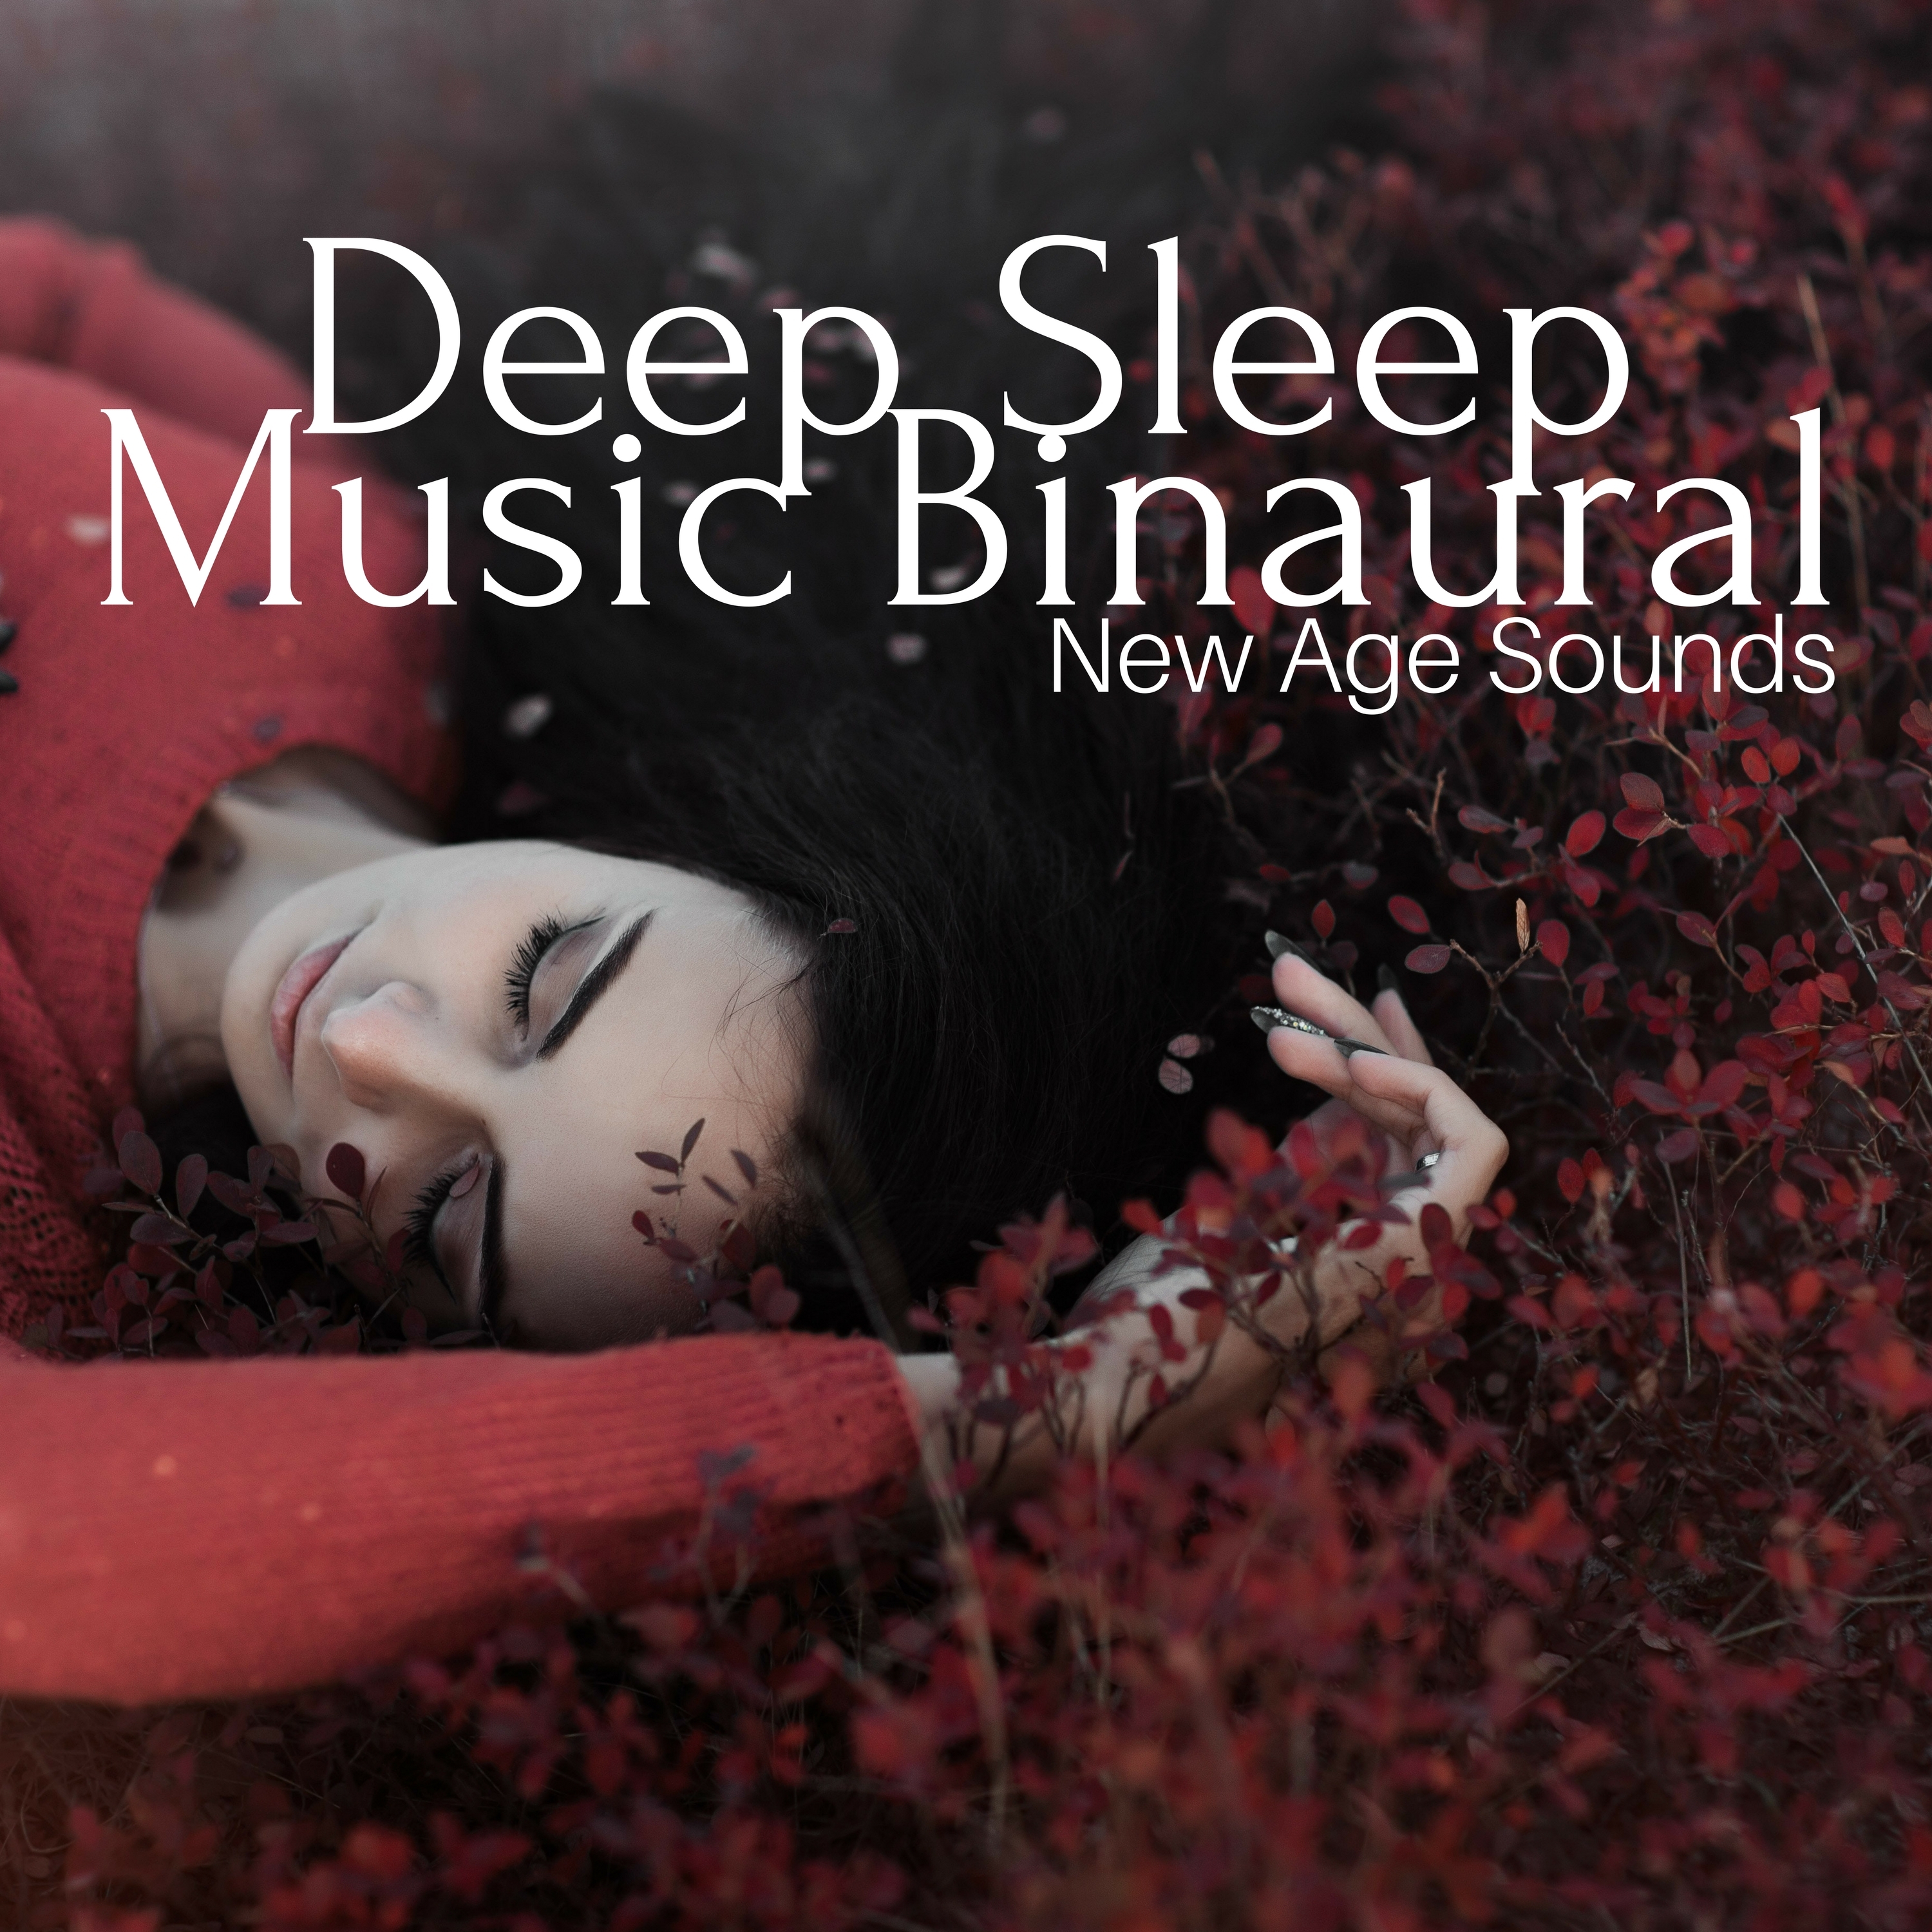 Deep Sleep Music Binaural - New Age Sounds for Natural Brain Relaxation